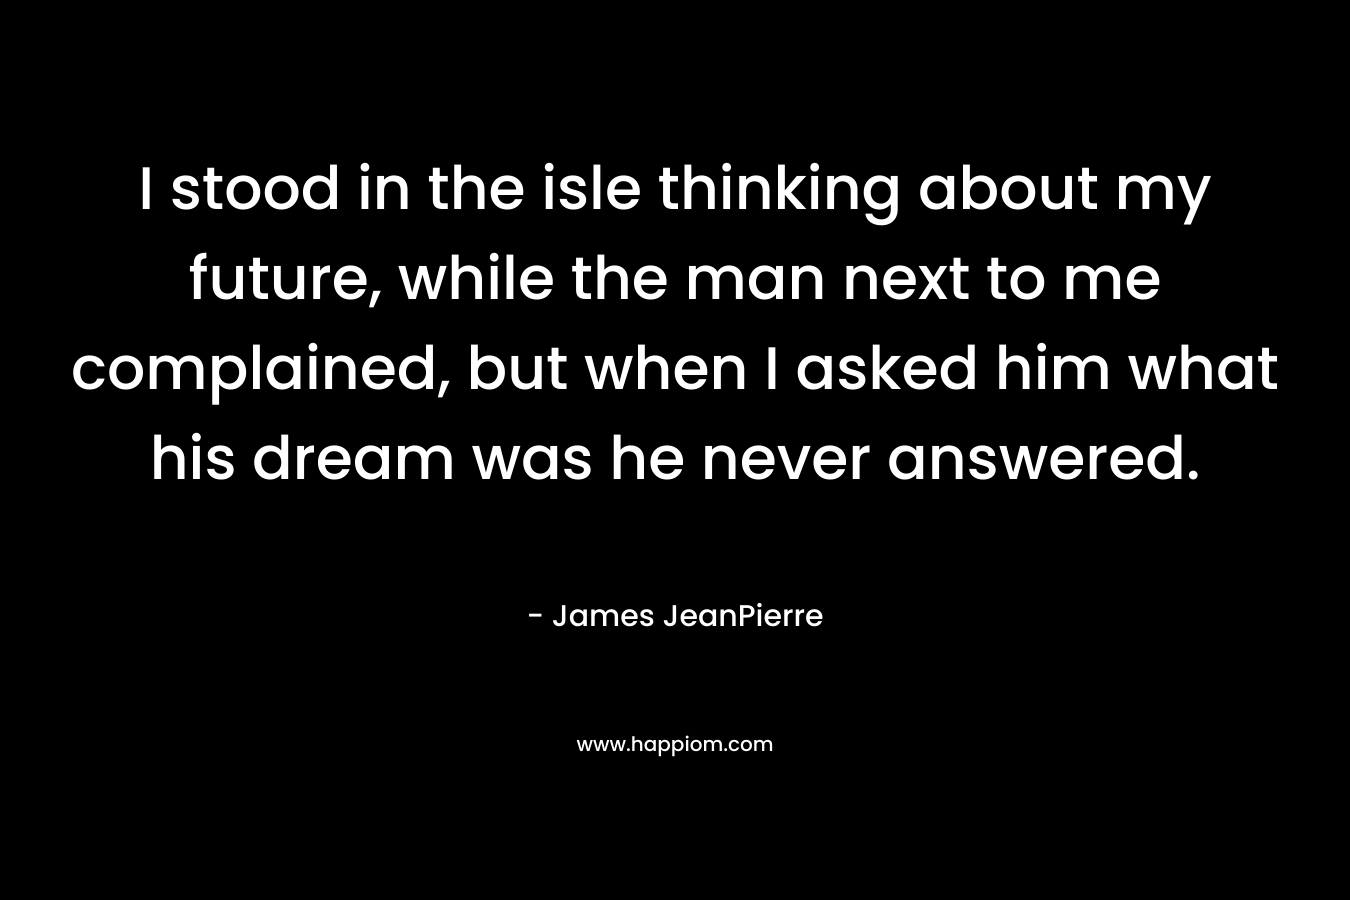 I stood in the isle thinking about my future, while the man next to me complained, but when I asked him what his dream was he never answered. – James JeanPierre